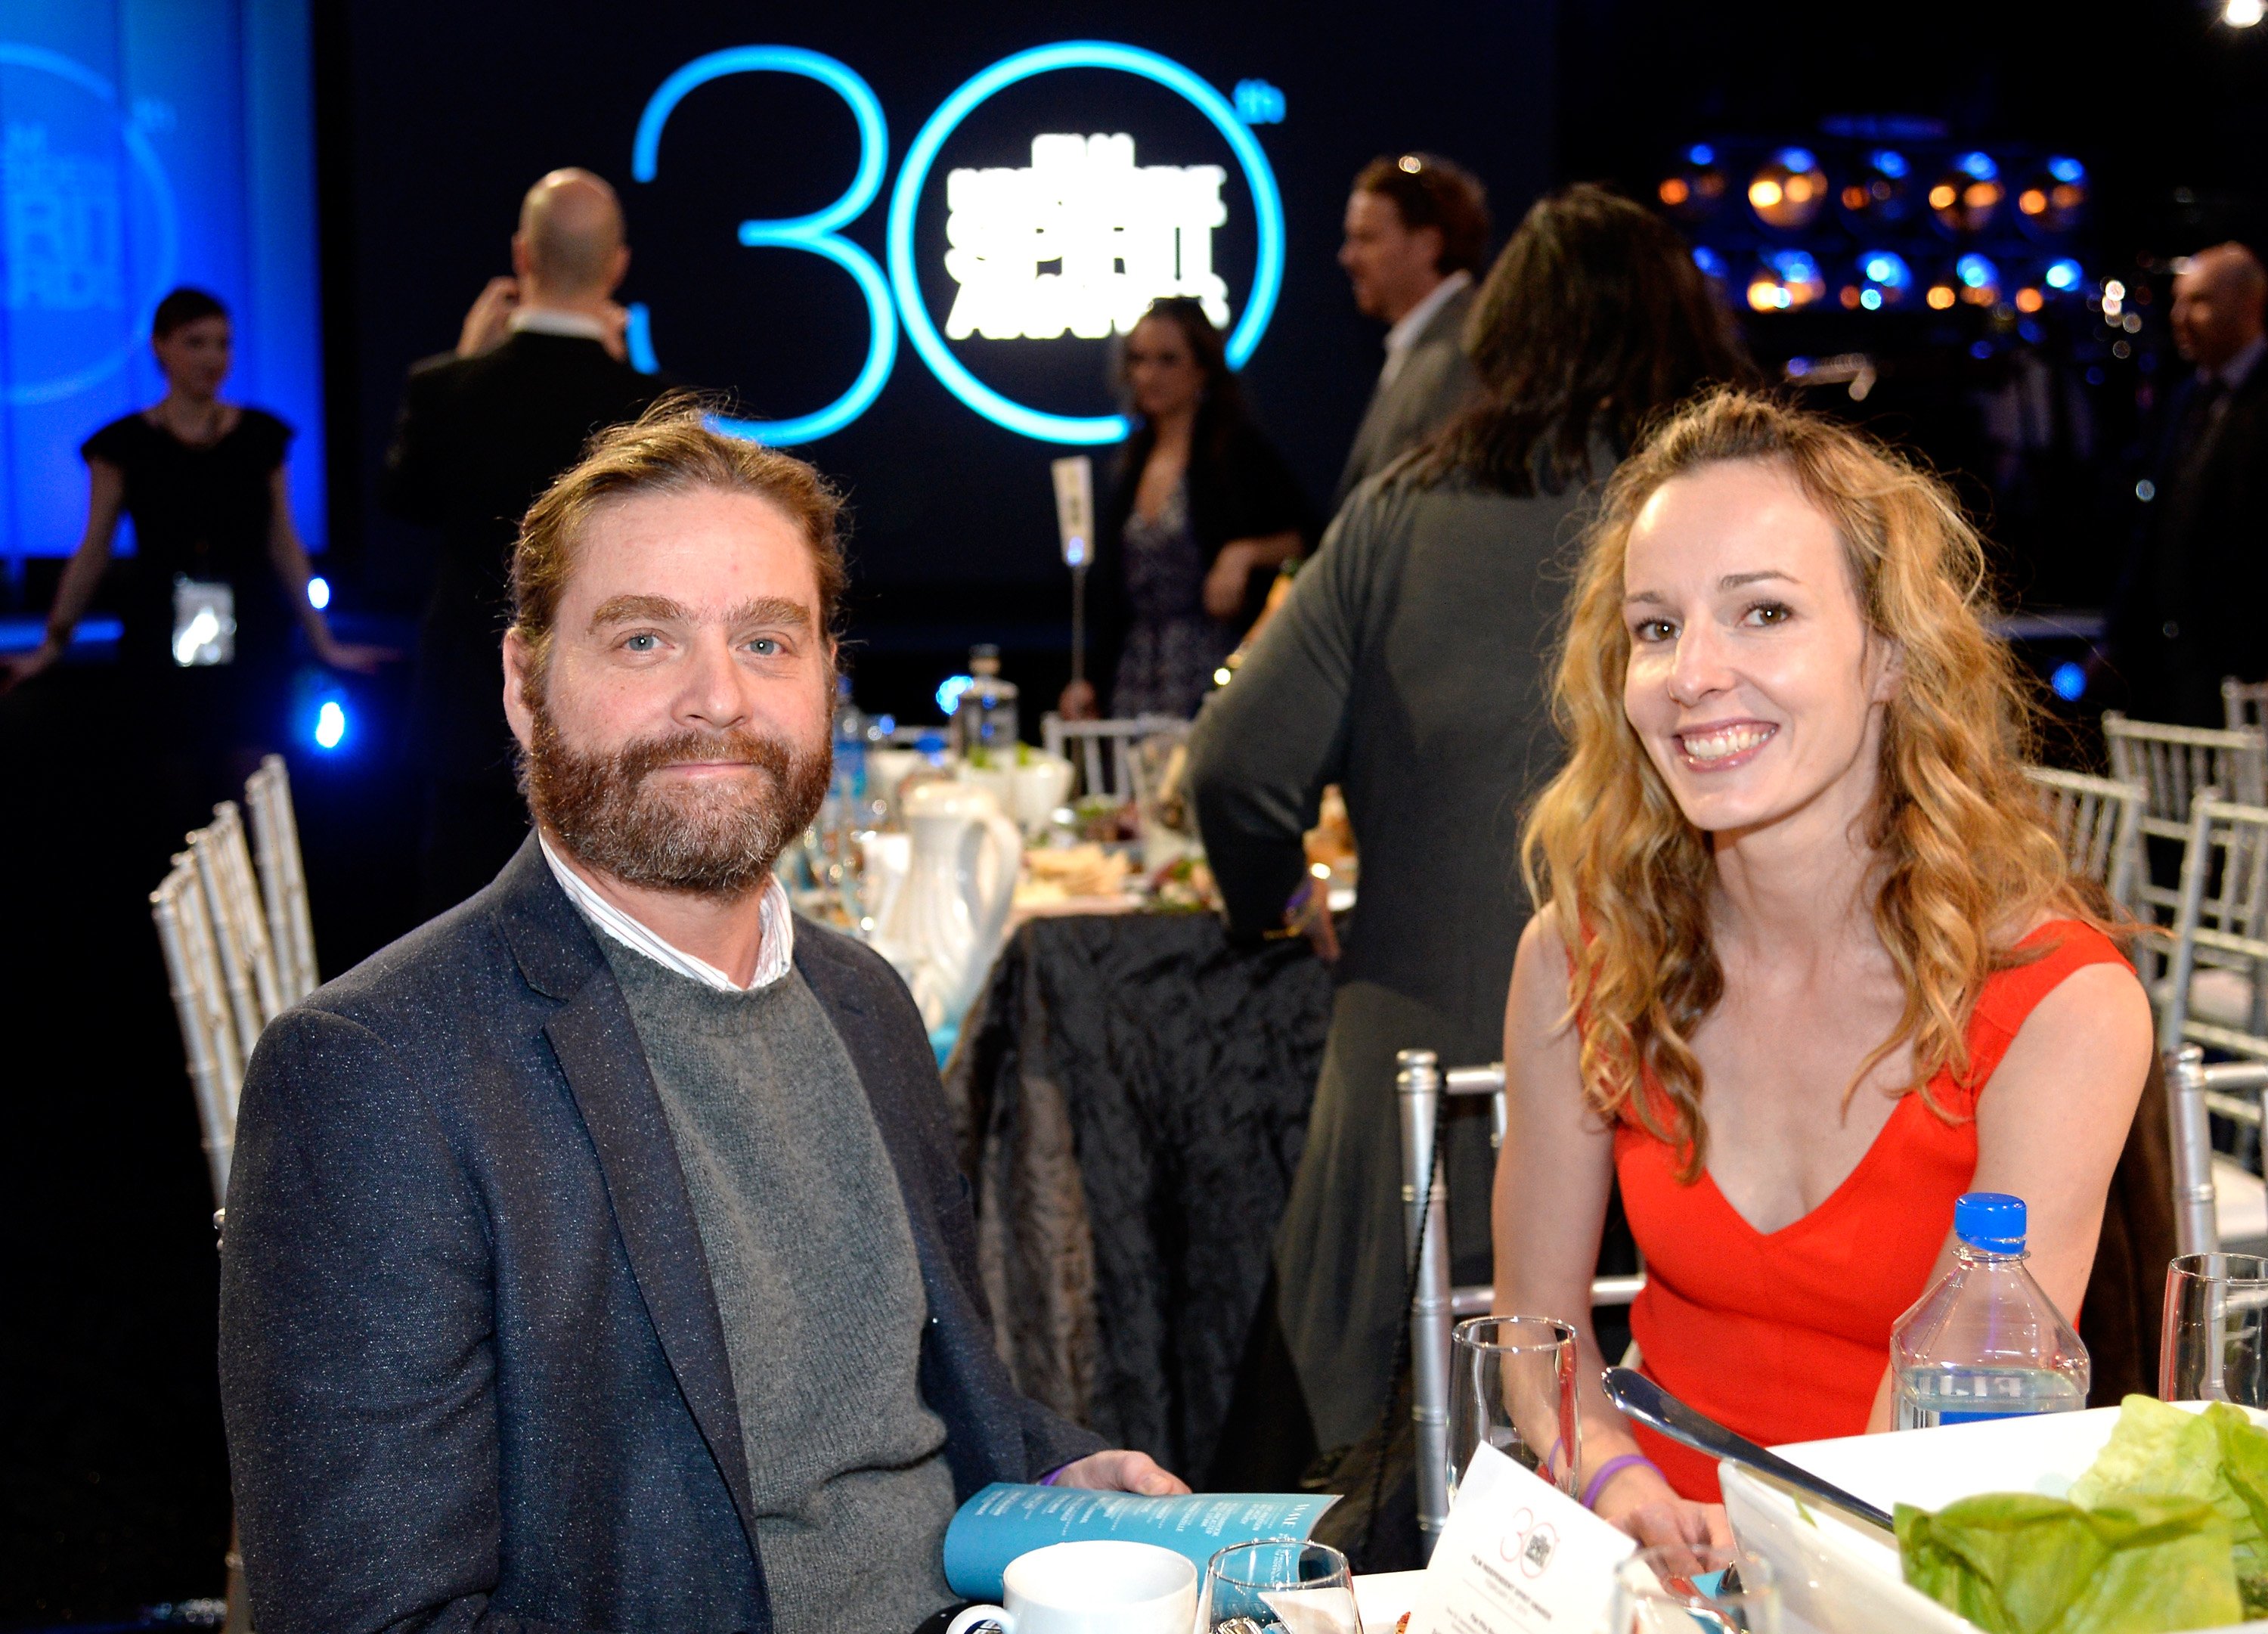 Zach Galifianakis (L) and Quinn Lundberg attend the 2015 Film Independent Spirit Awards at Santa Monica Beach on February 21, 2015 in Santa Monica, California. | Source: Getty Images